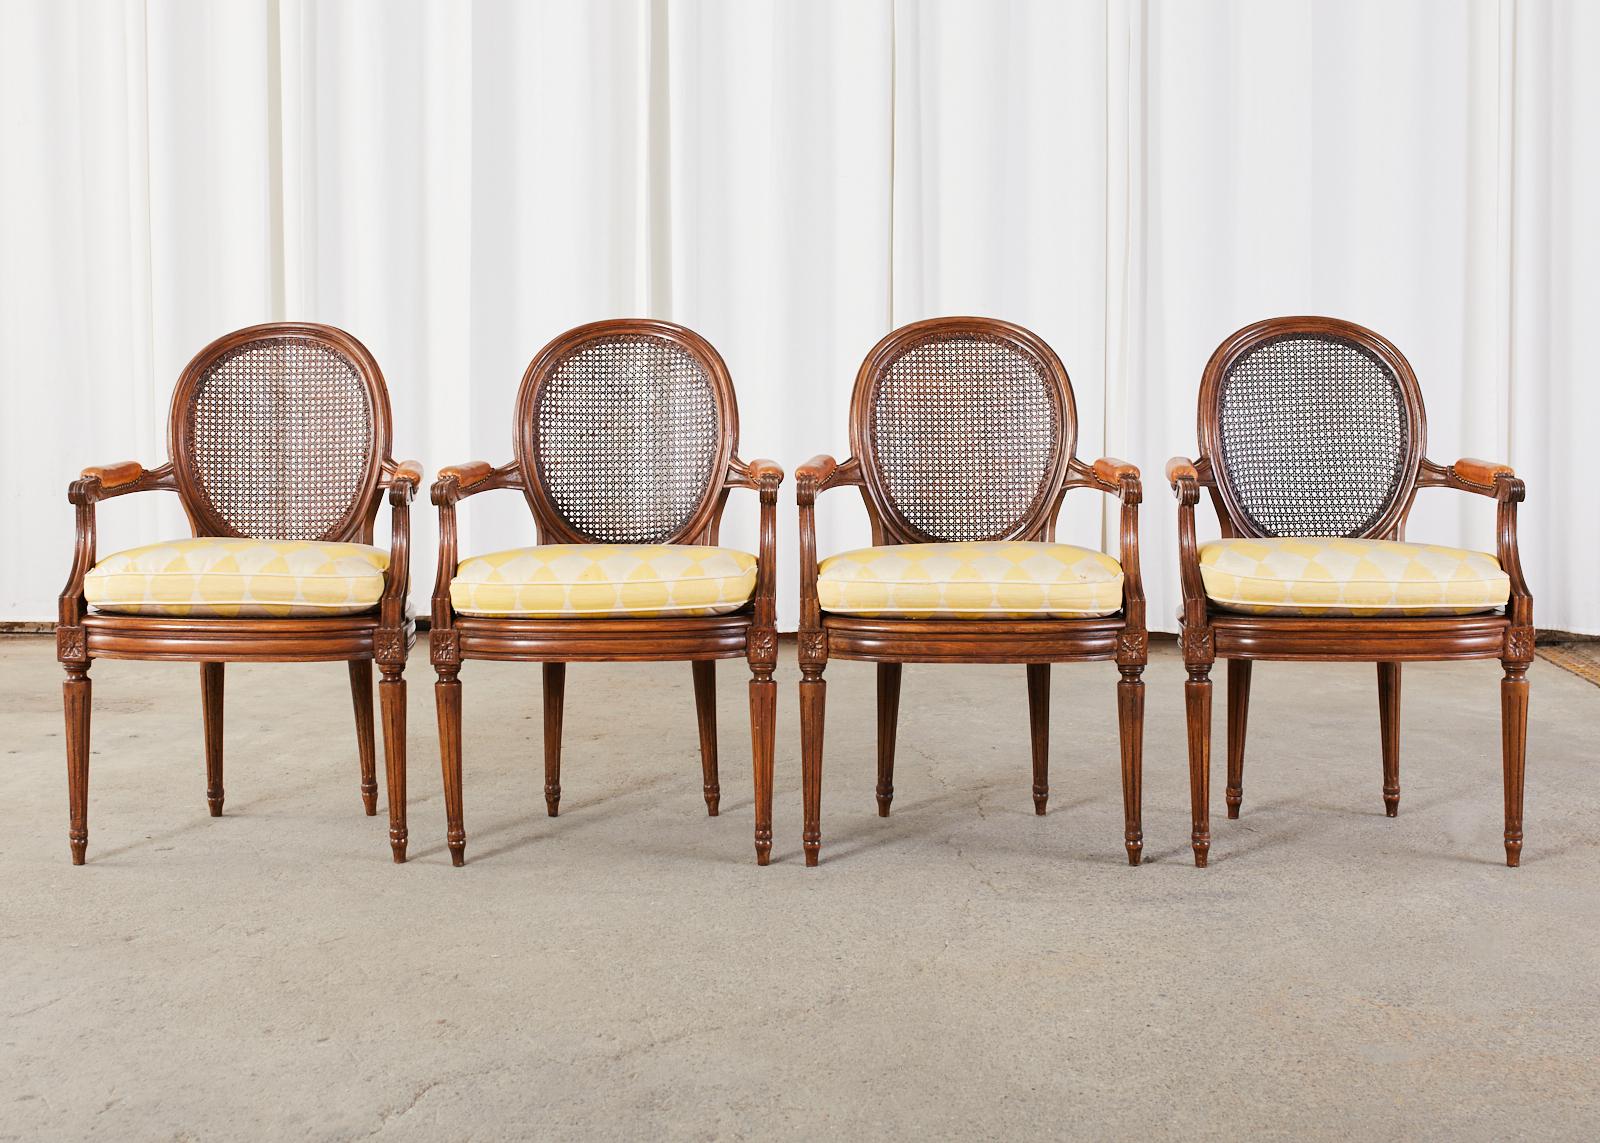 Handsome set of four French mahogany dining armchairs featuring round cane backs and cane seats. Hand-crafted in the grand Louis XVI taste having molded arms and bowed seat decorated with rosettes. The leather padded arms measure 27 inches high and